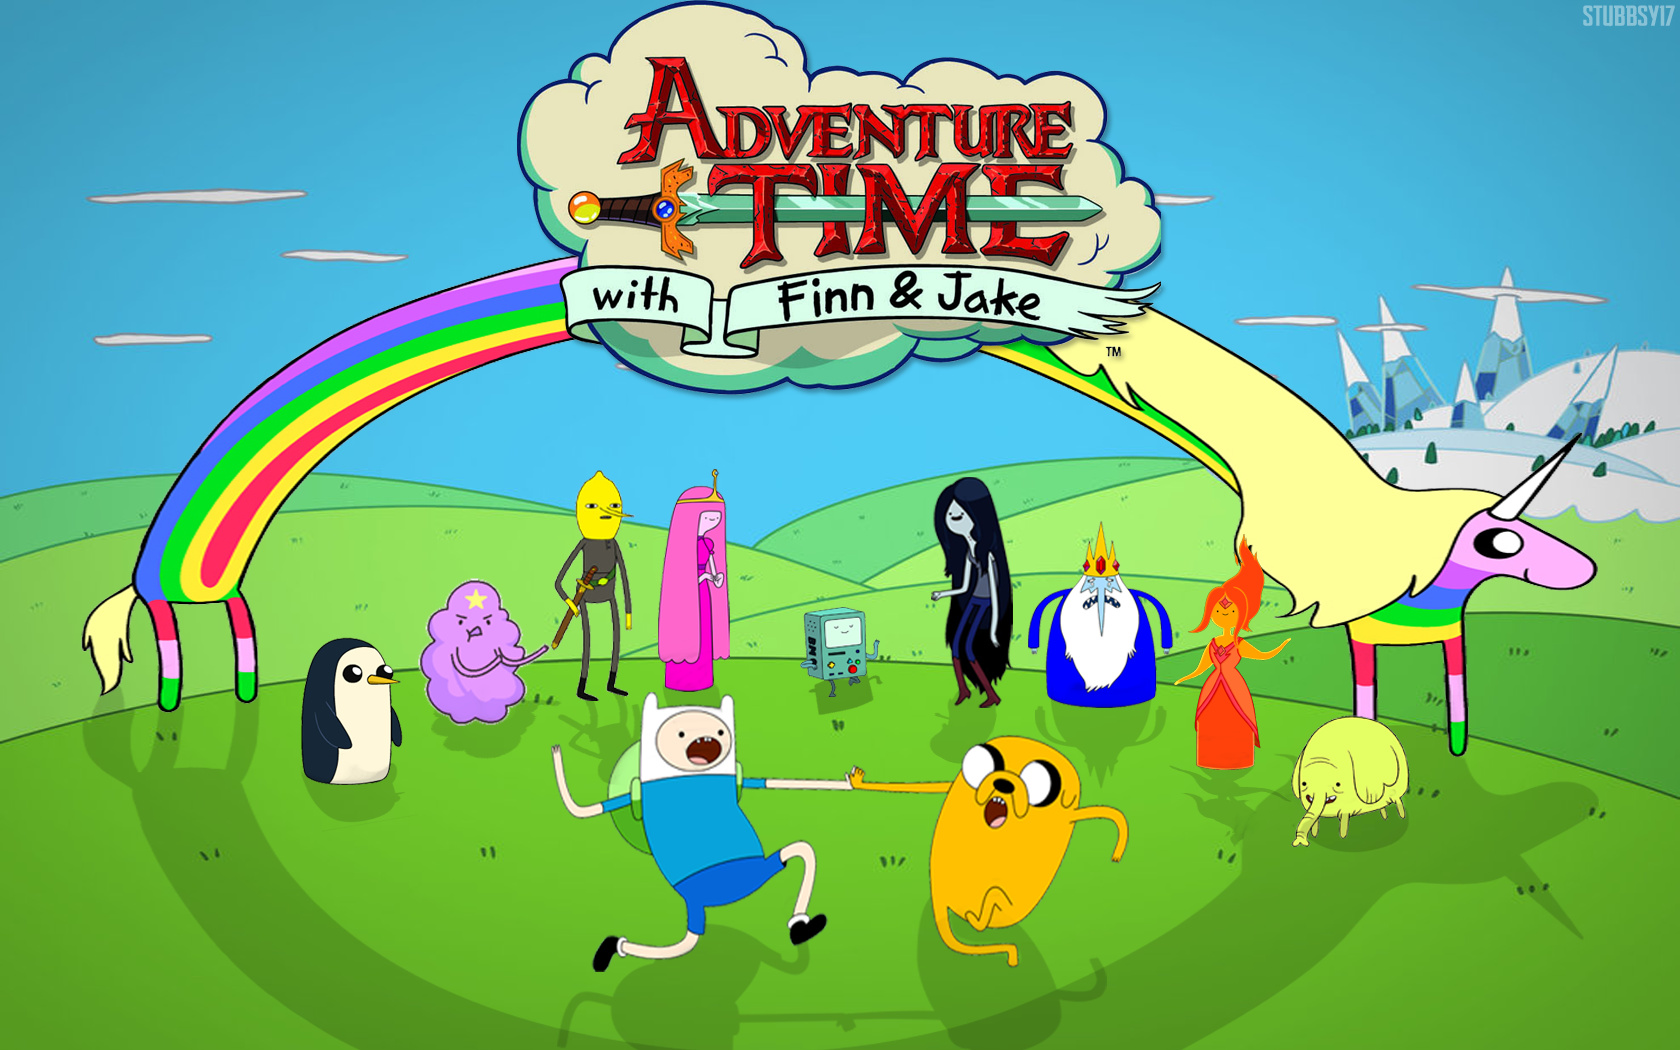 Adventure Time アドベンチャー タイム 壁紙 ファンポップ Page 10